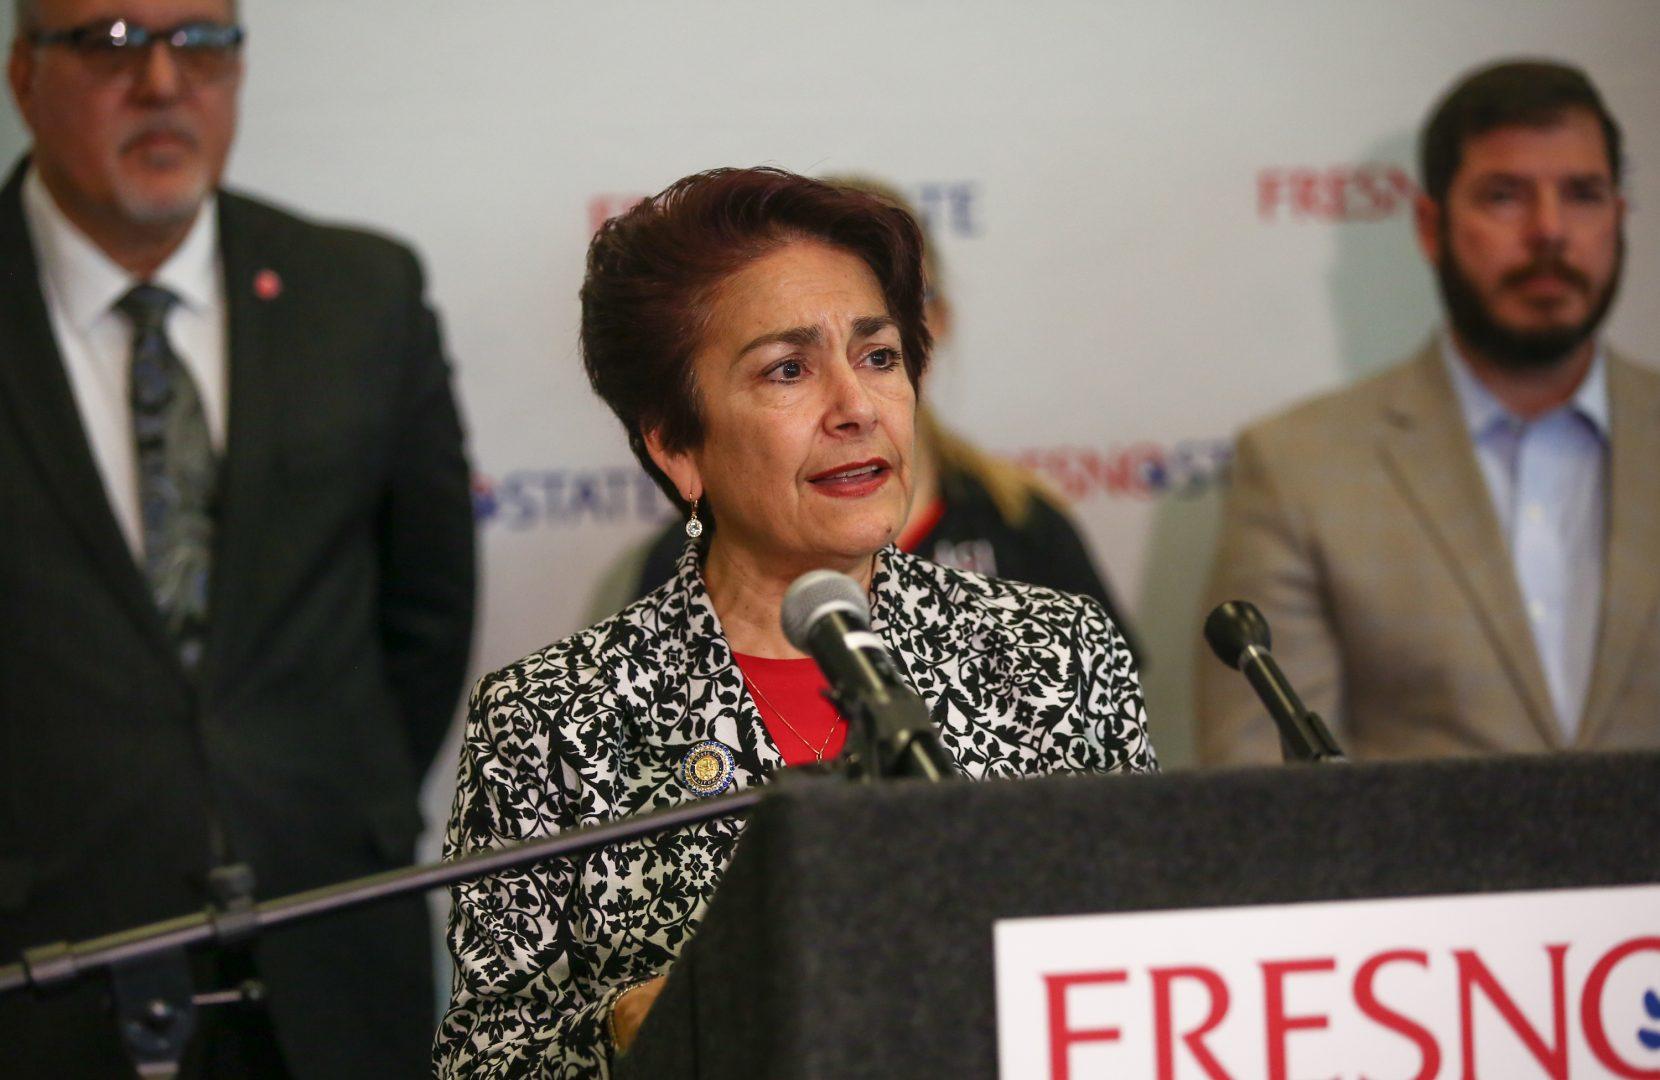 Assemblywoman Anna Caballero spoke at a news conference at Fresno State last week to introduce Assembly Bill 2784, which aims to combat homelessness among college students.
(Alex Soto/The Collegian)